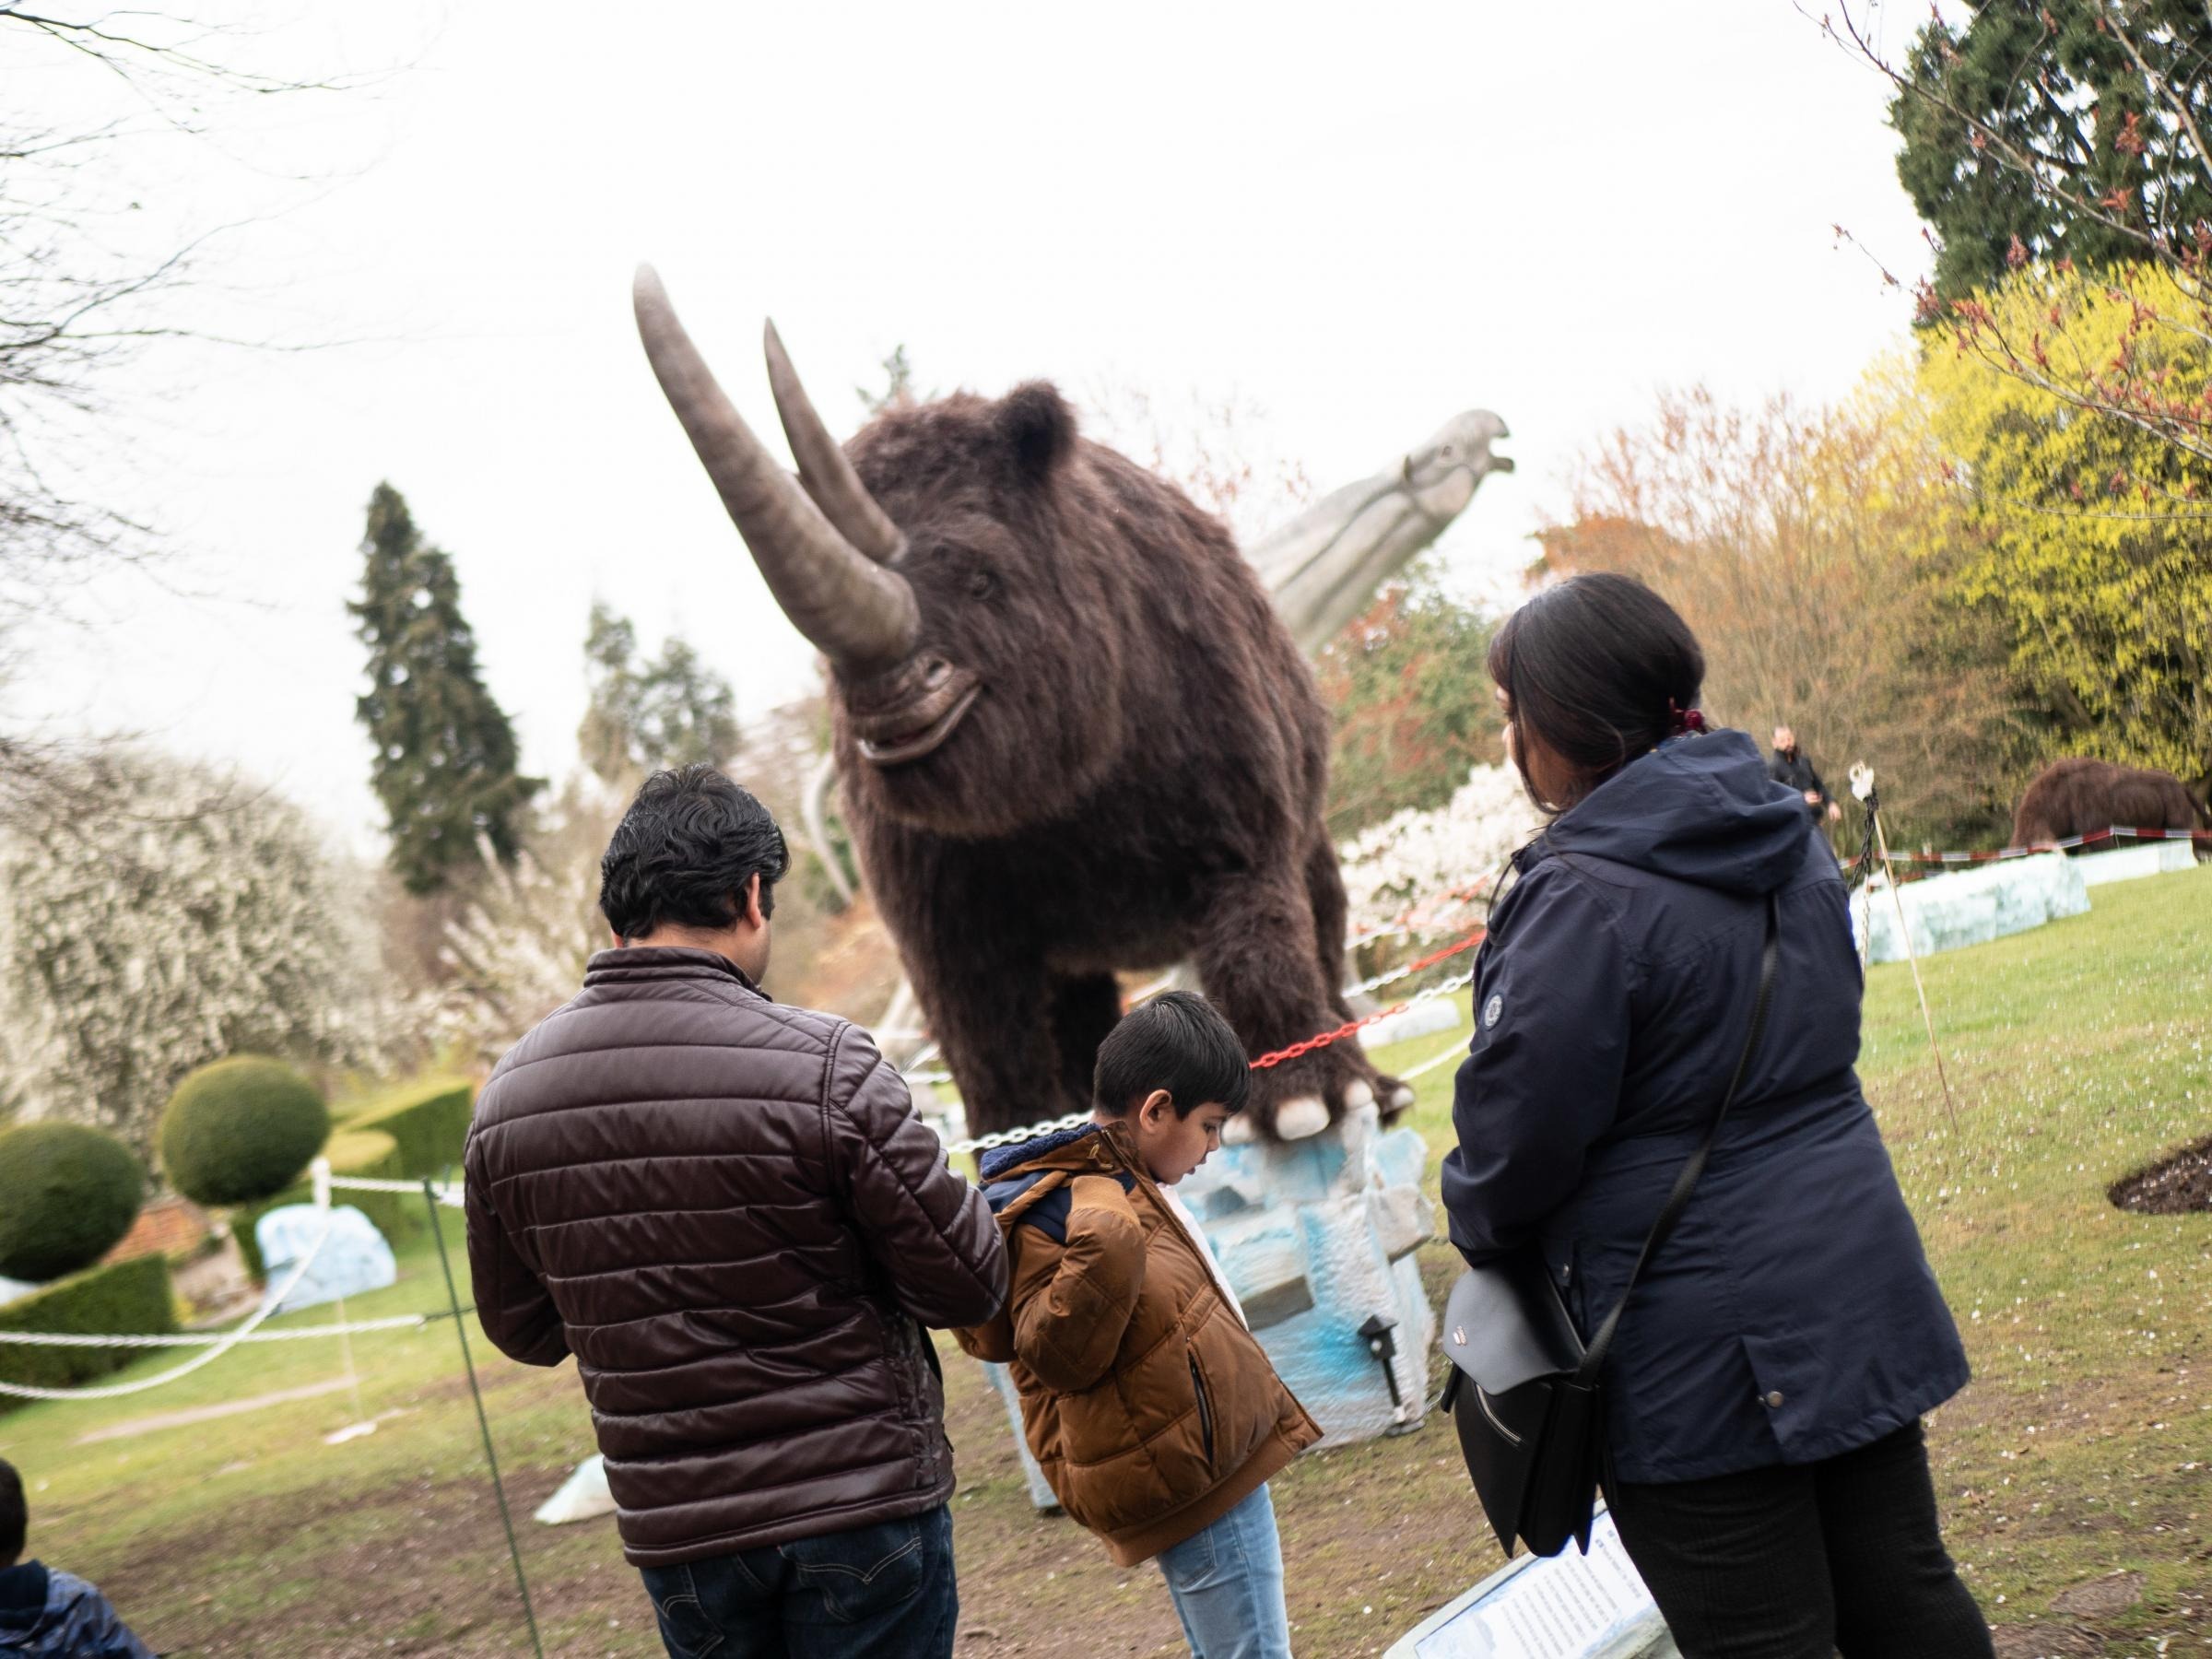 A Woolly Rhino that would have been on display